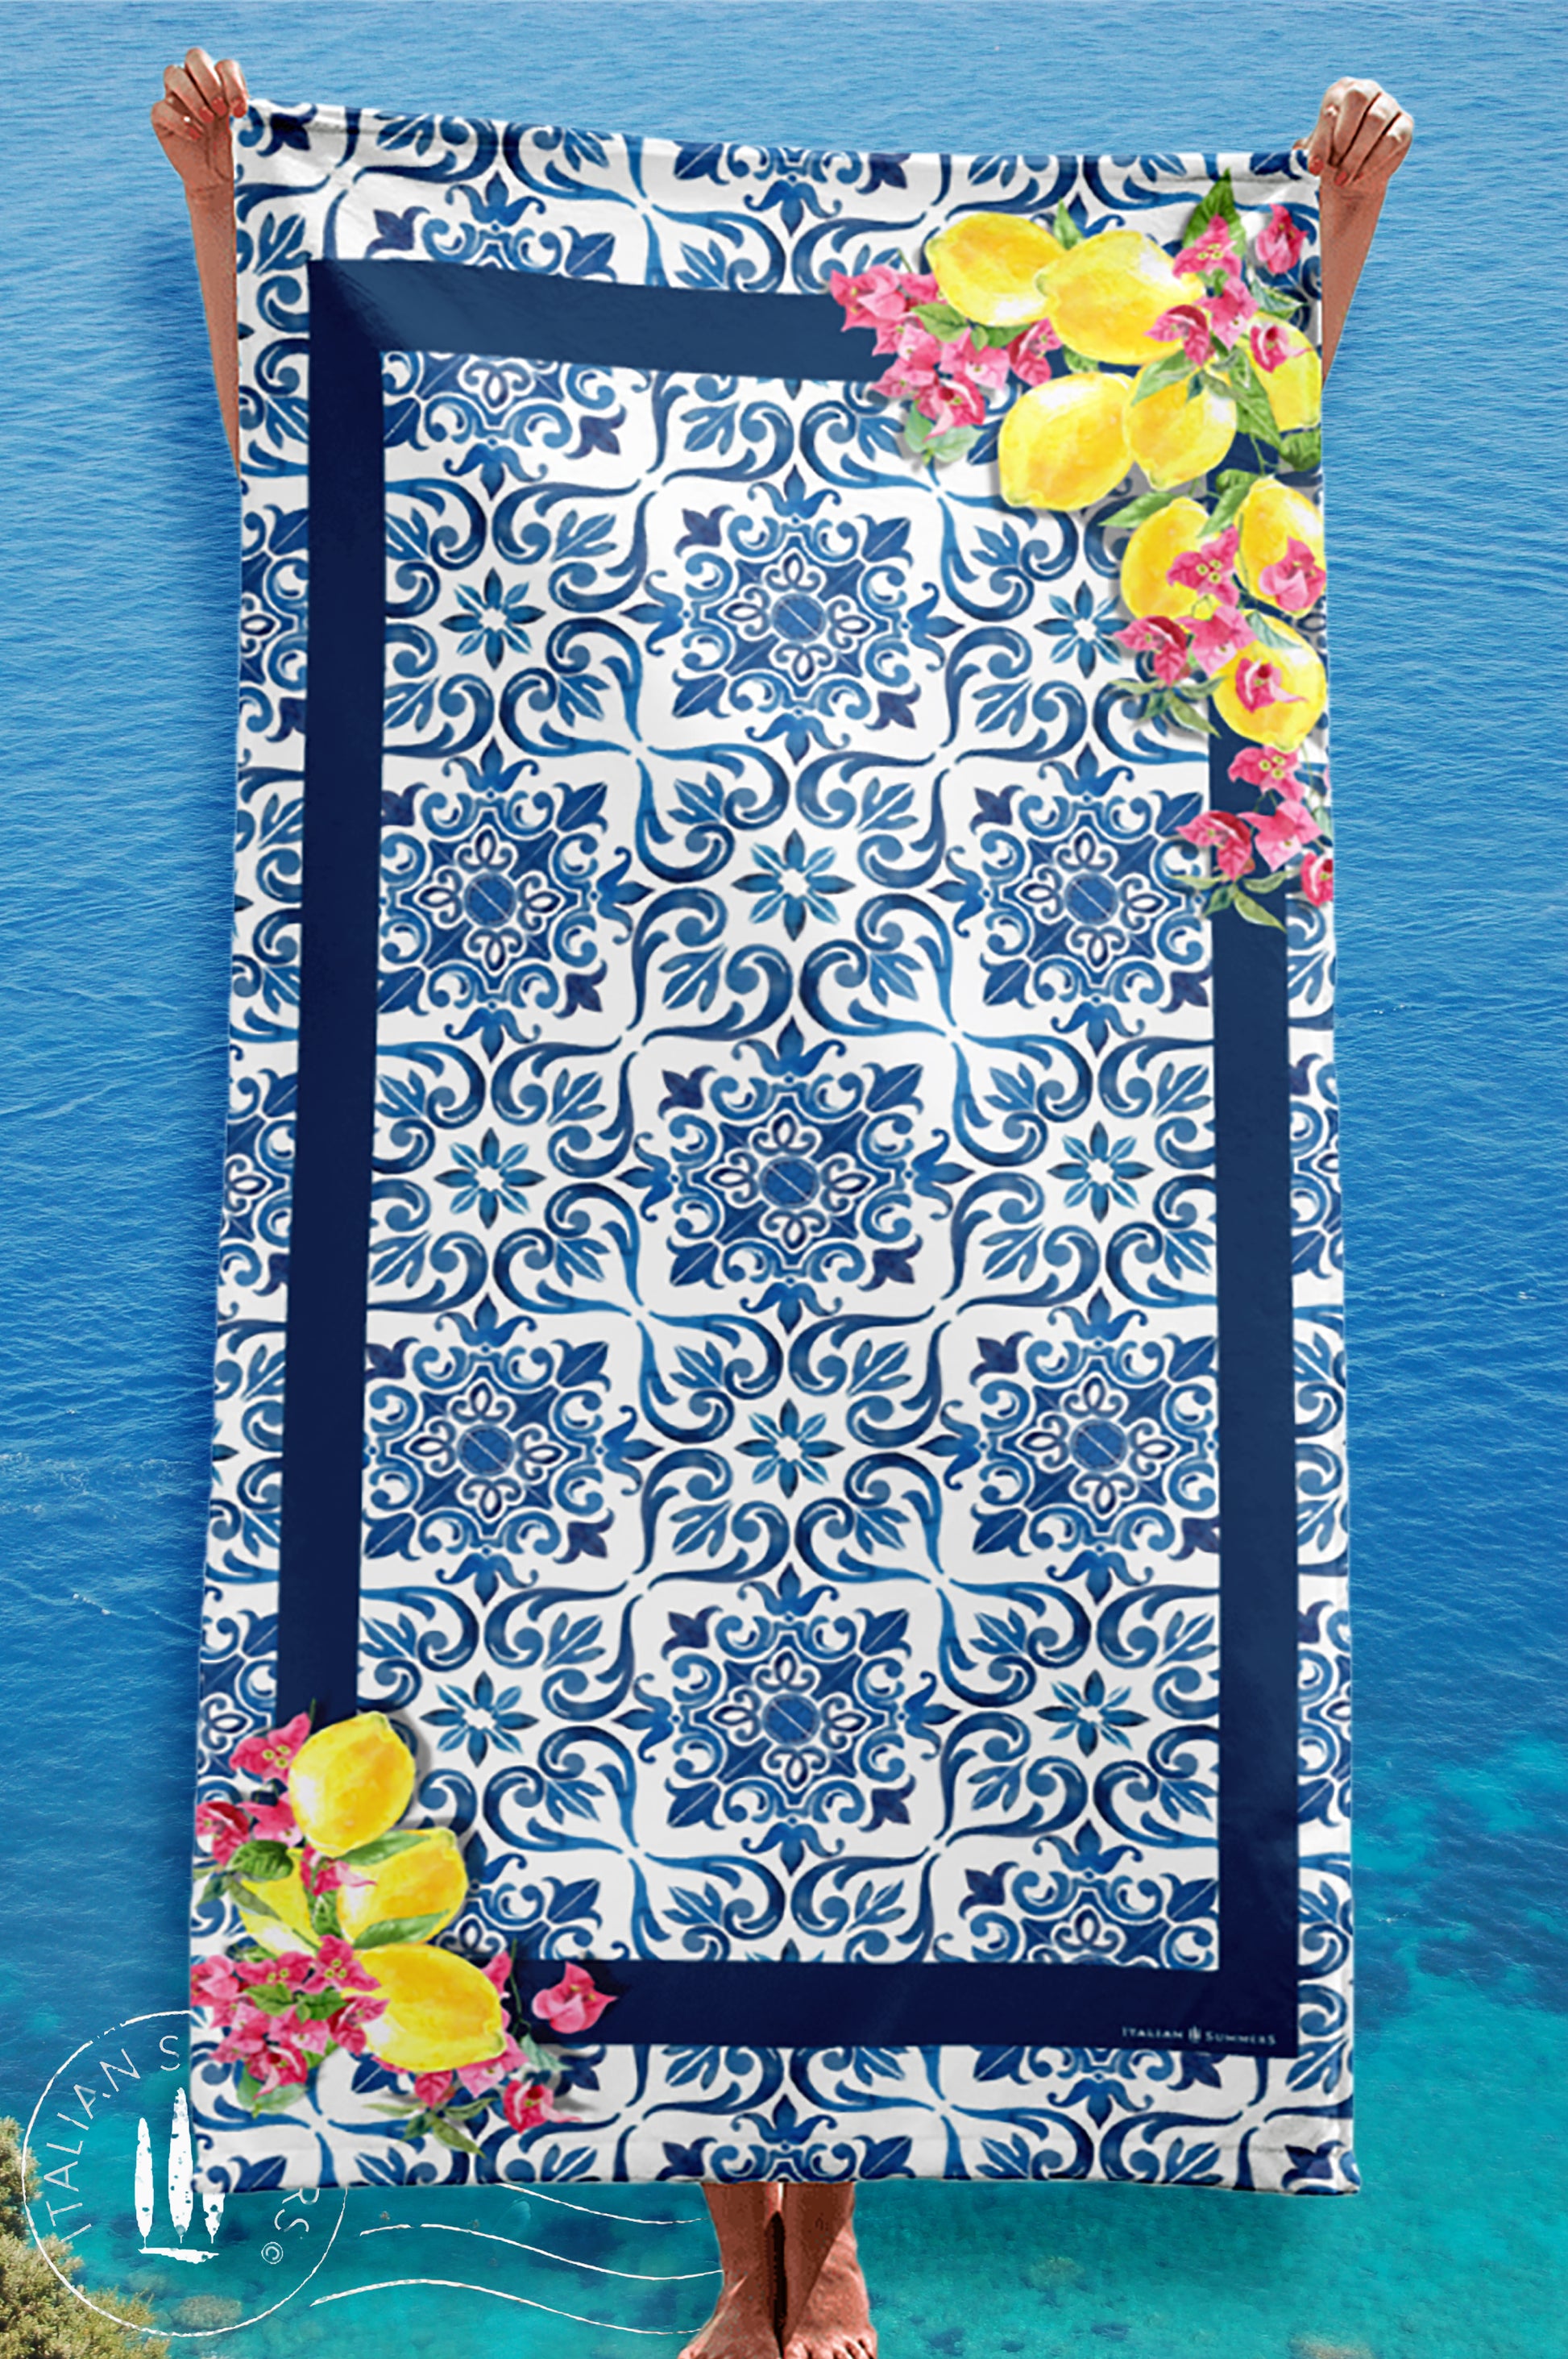 Italy inspired beach towel with blue hand painted maiolica tile design and Sorrento Lemons and bougainvillea fowers. Made by Italian Summers